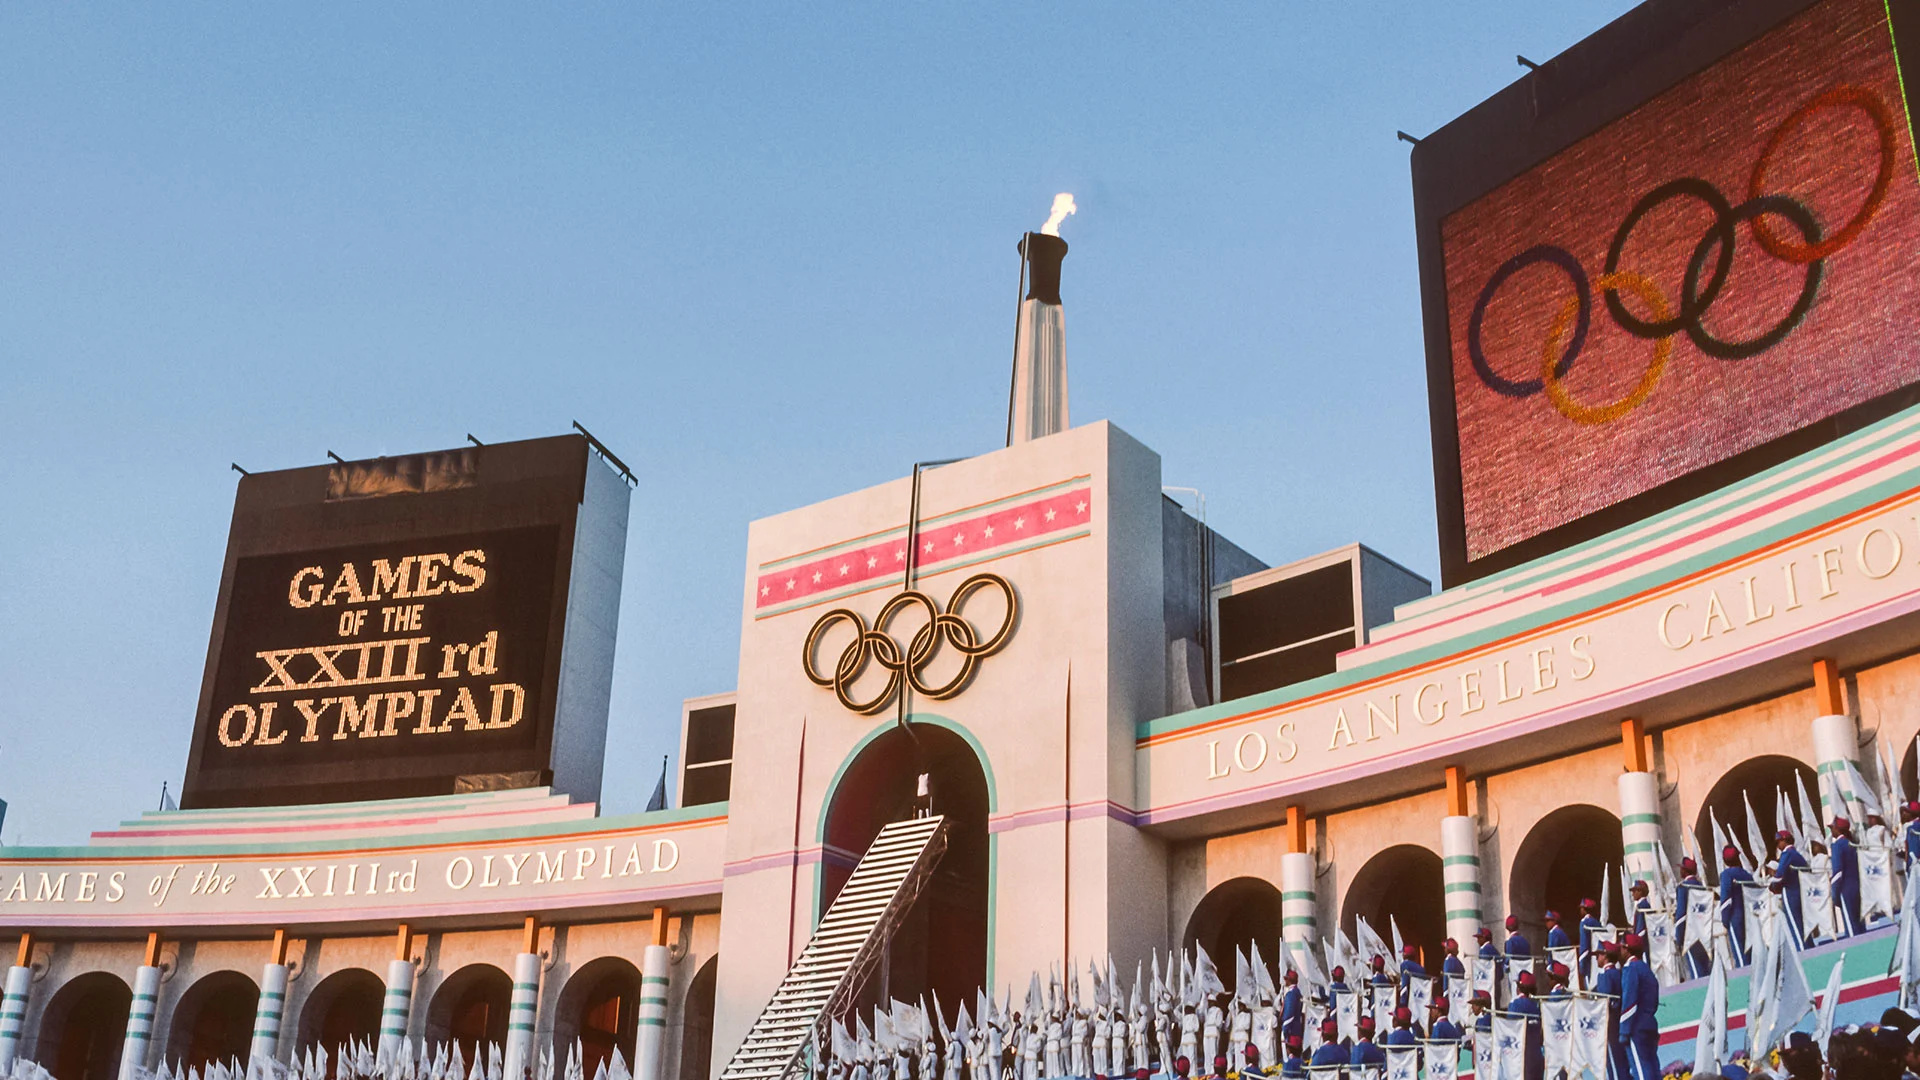 Olympic Flame: Opening ceremony, Los Angeles Coliseum, Summer Olympics, on July 28, 1984, Most Memorable Olympic Cauldron in History. 1920x1080 Full HD Wallpaper.